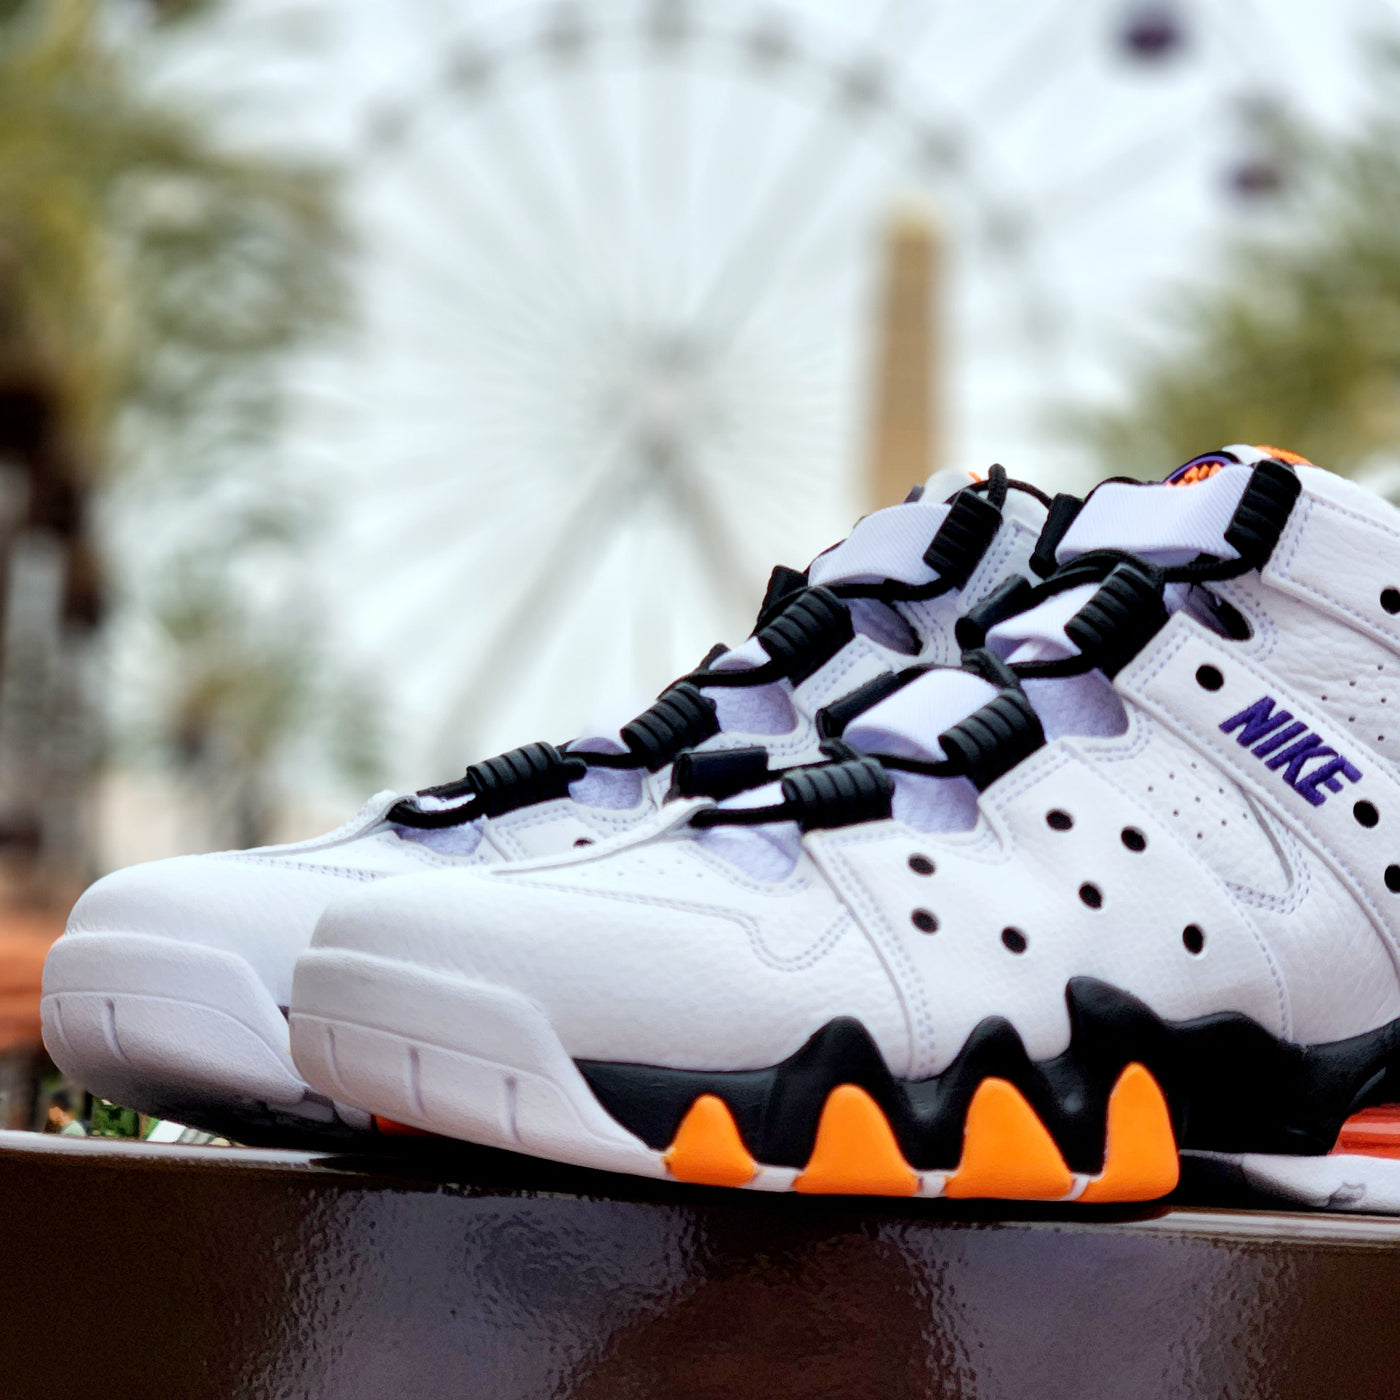 Nike Air Max CB 94 Suns Release Information